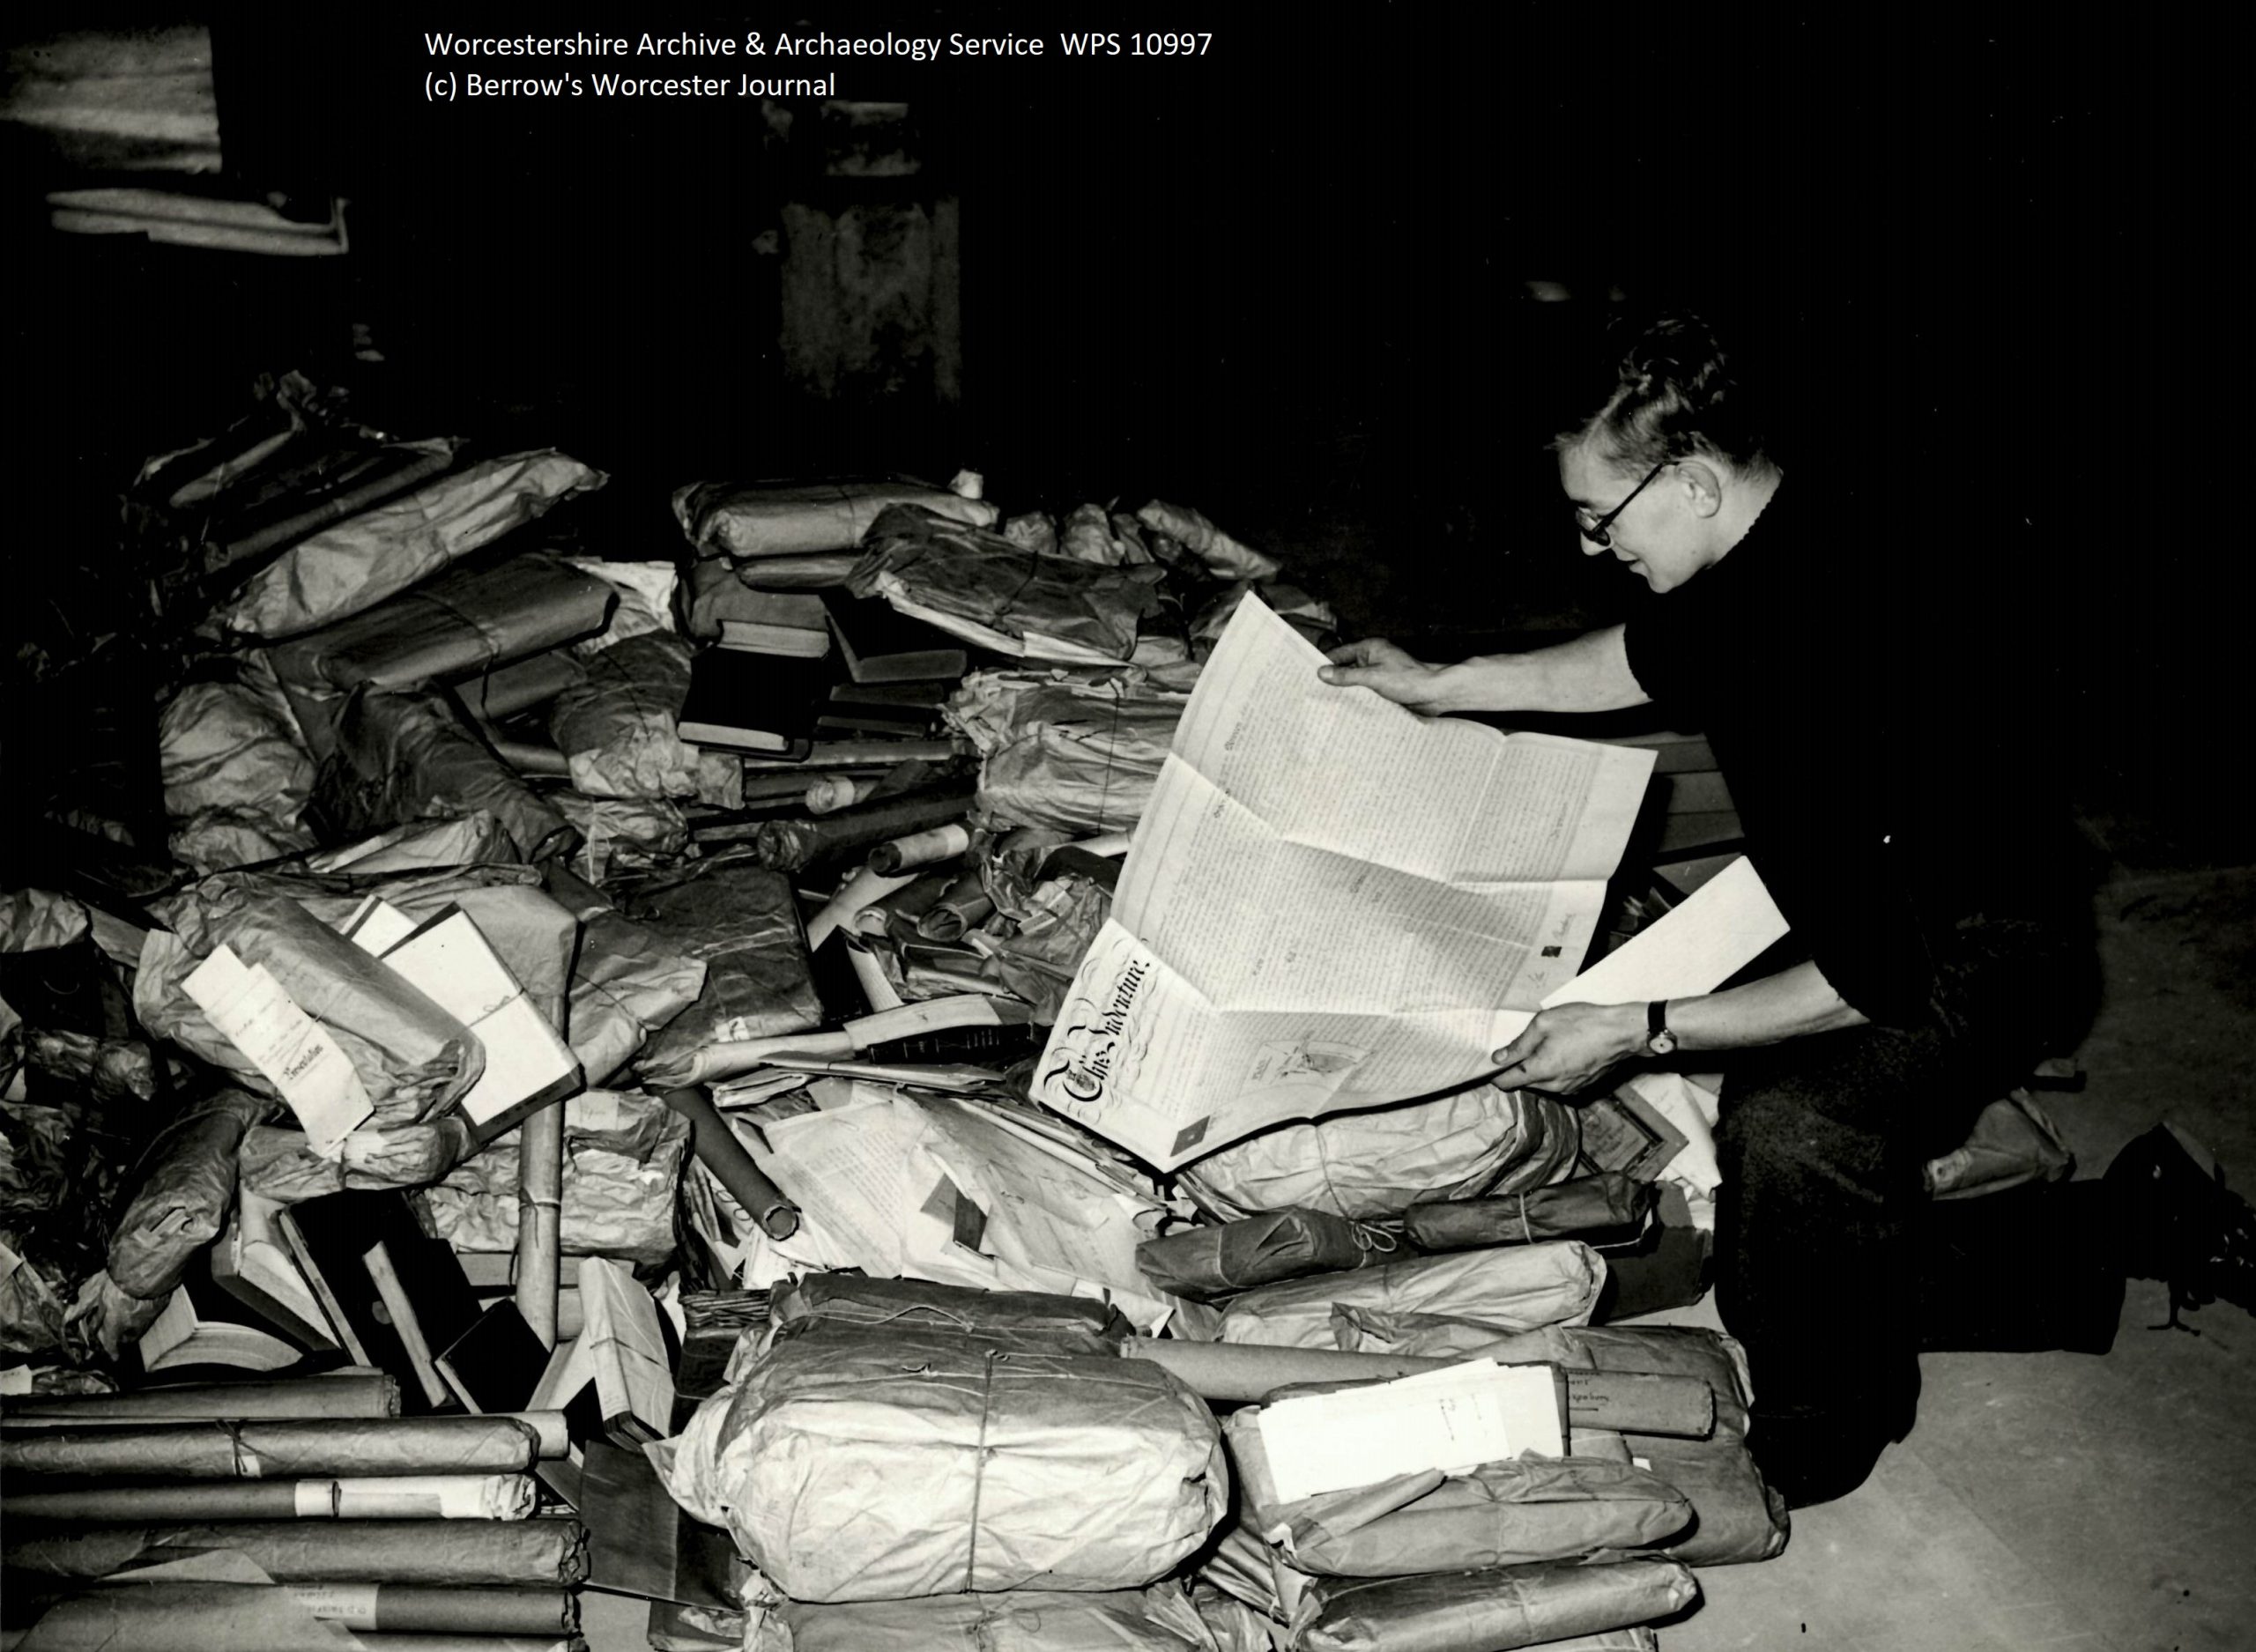 Brian Smith searching through a large pile of packages